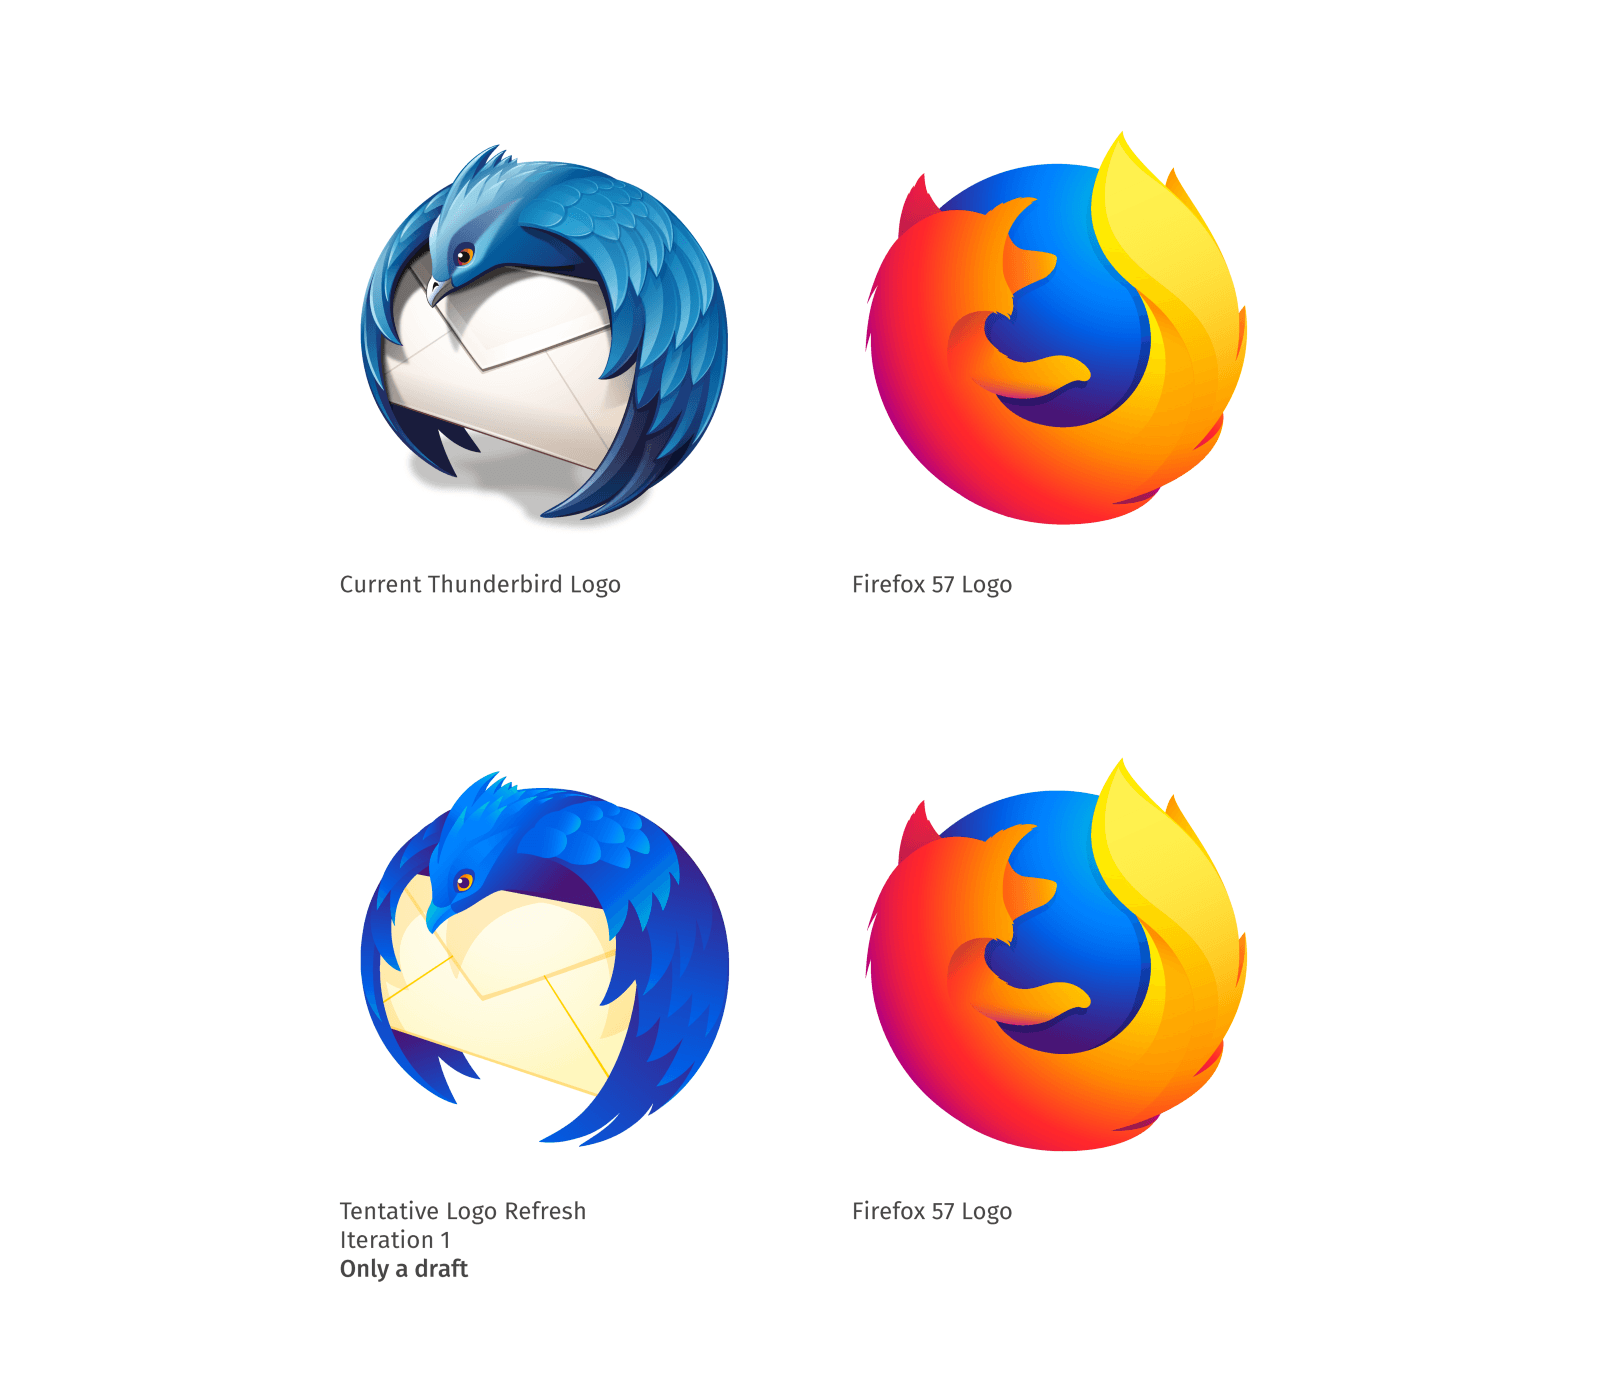 Firefox Old Logo - Is this the new Thunderbird Logo? And Other